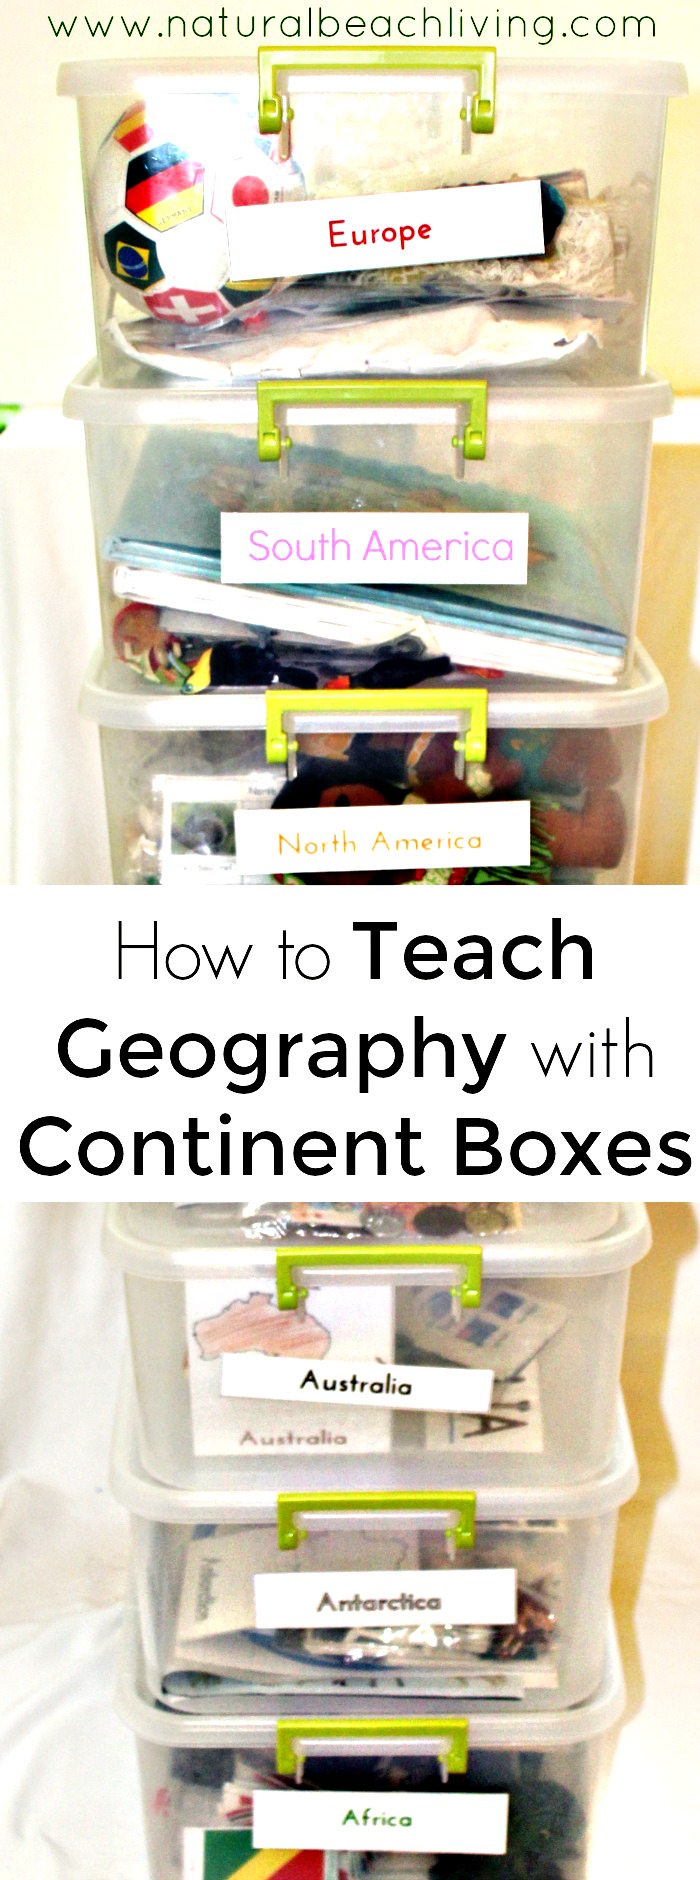 How to Teach Geography with Continent Boxes, DIY Montessori Continent Boxes, A multi-sensory approach to learning with kids, Montessori Geography